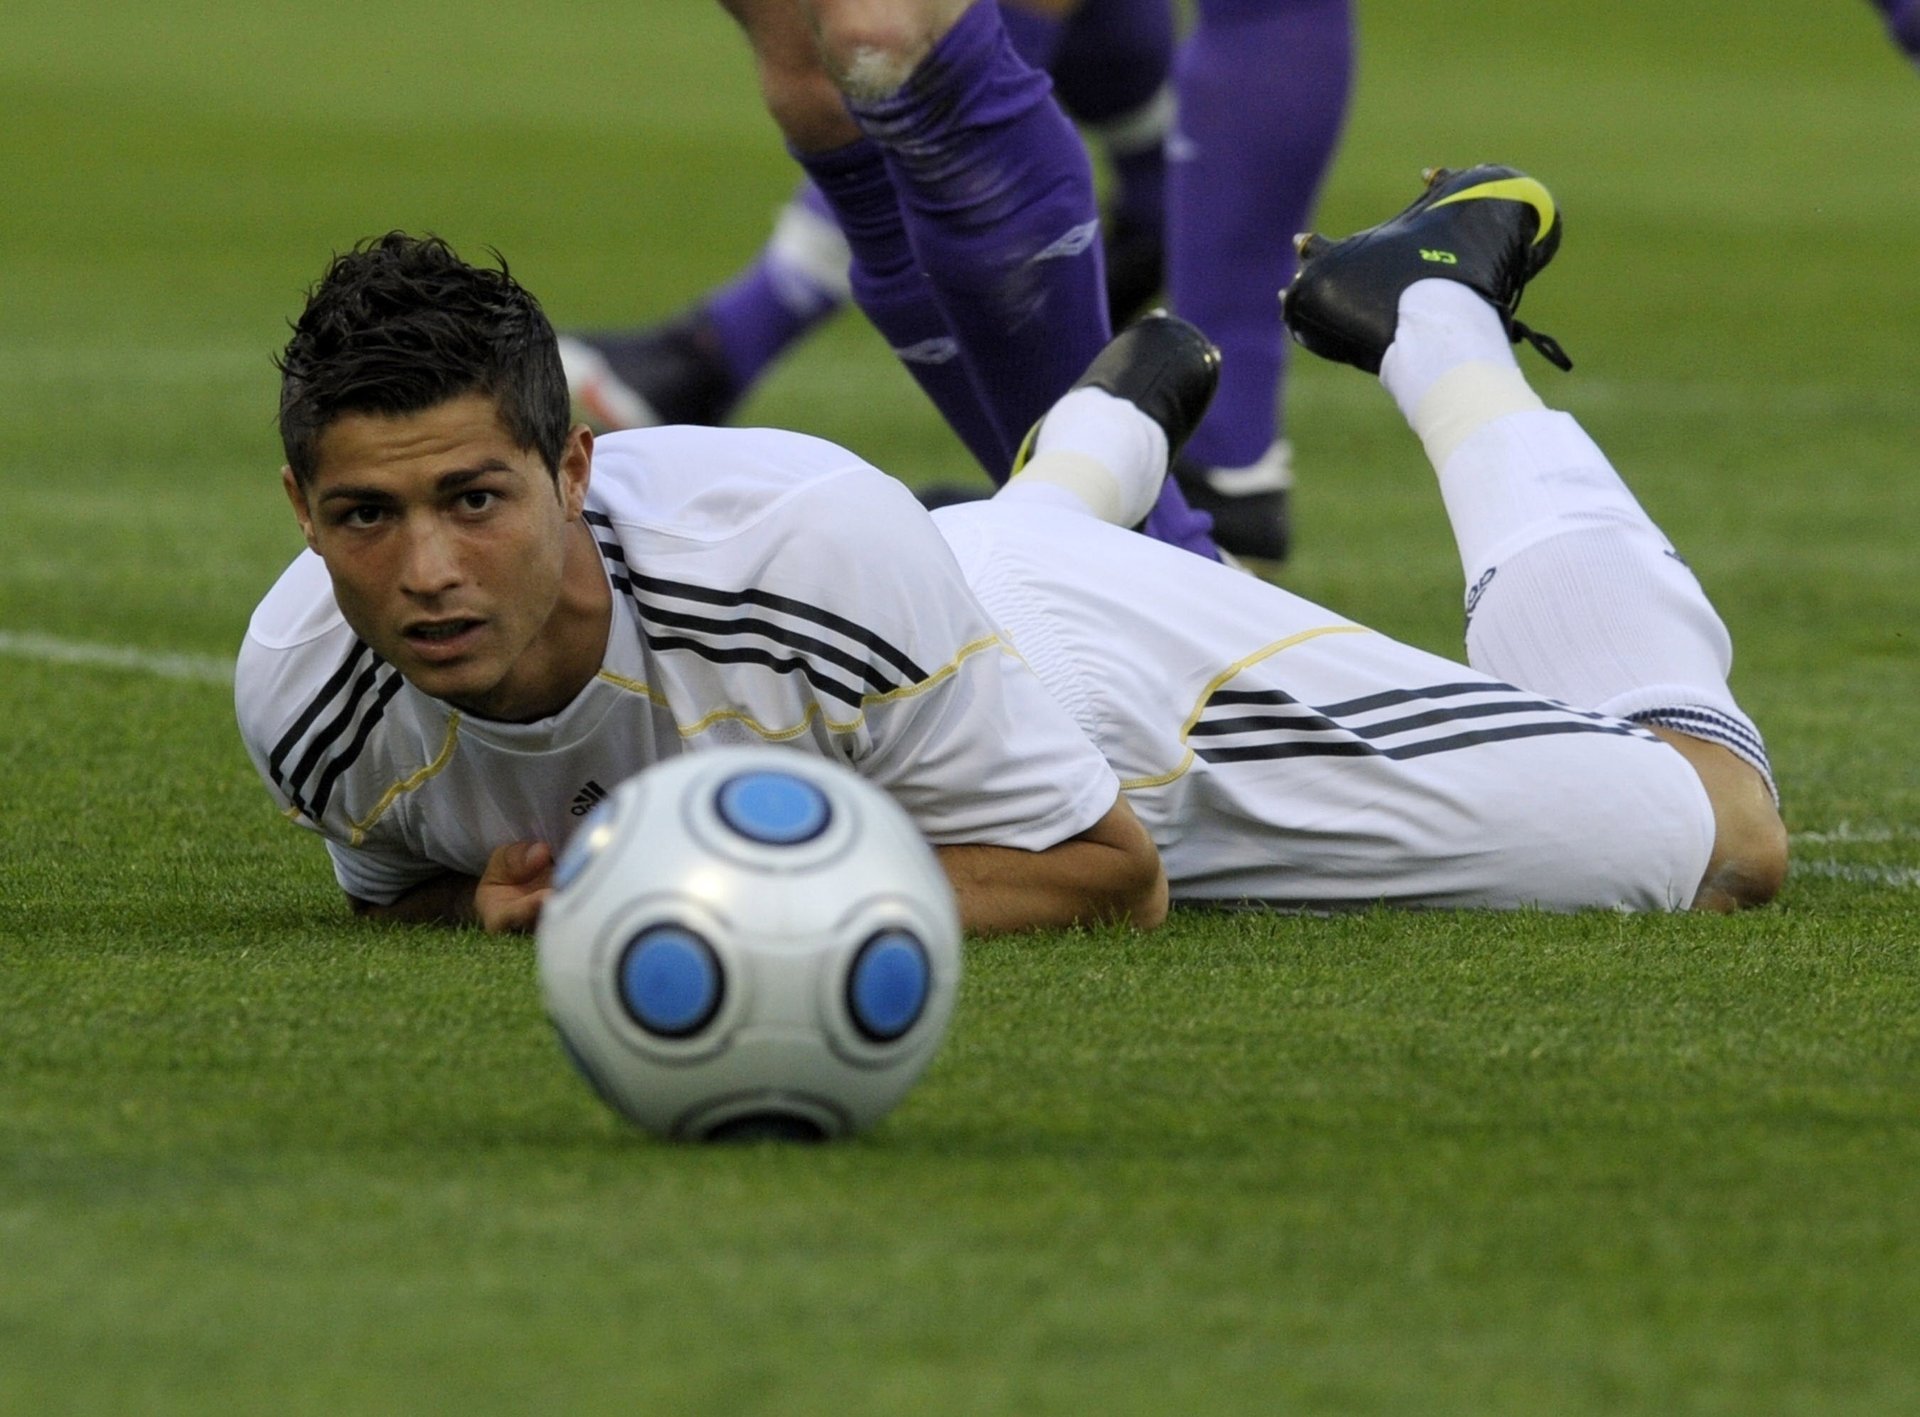 A football game. Ronaldo is lying on the lawn